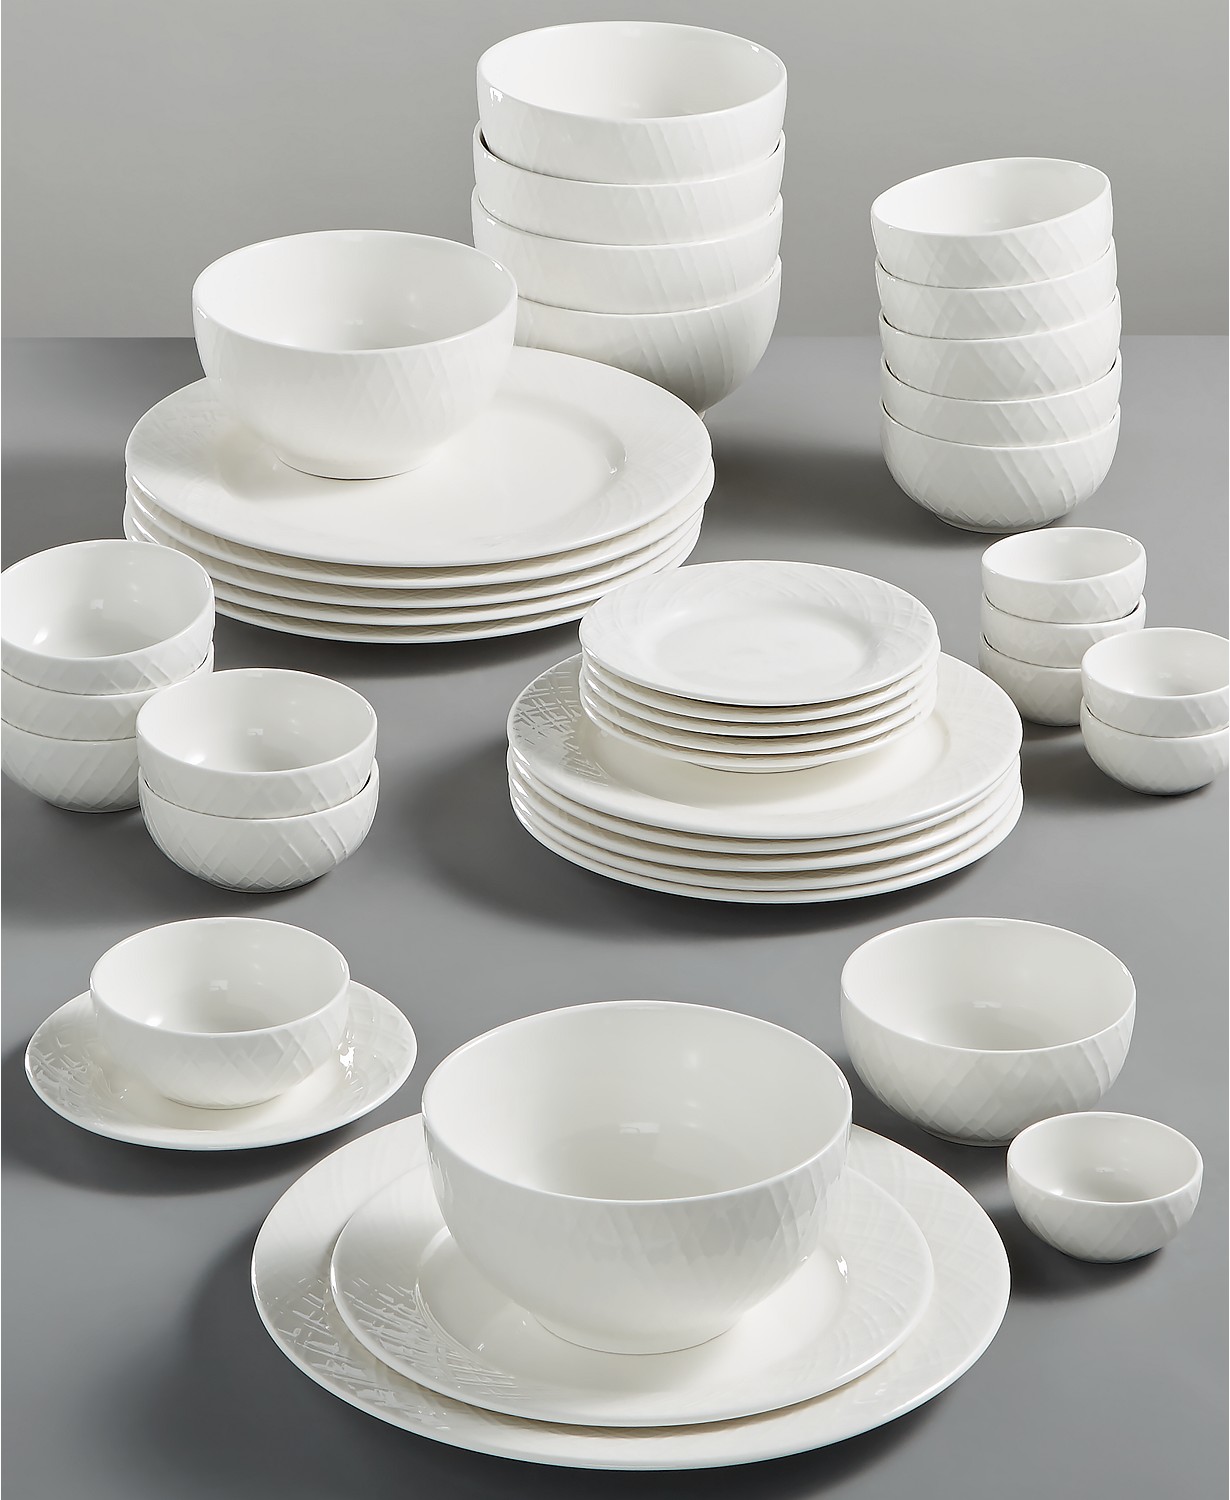 42-piece Gibson dinnerware sets for $40